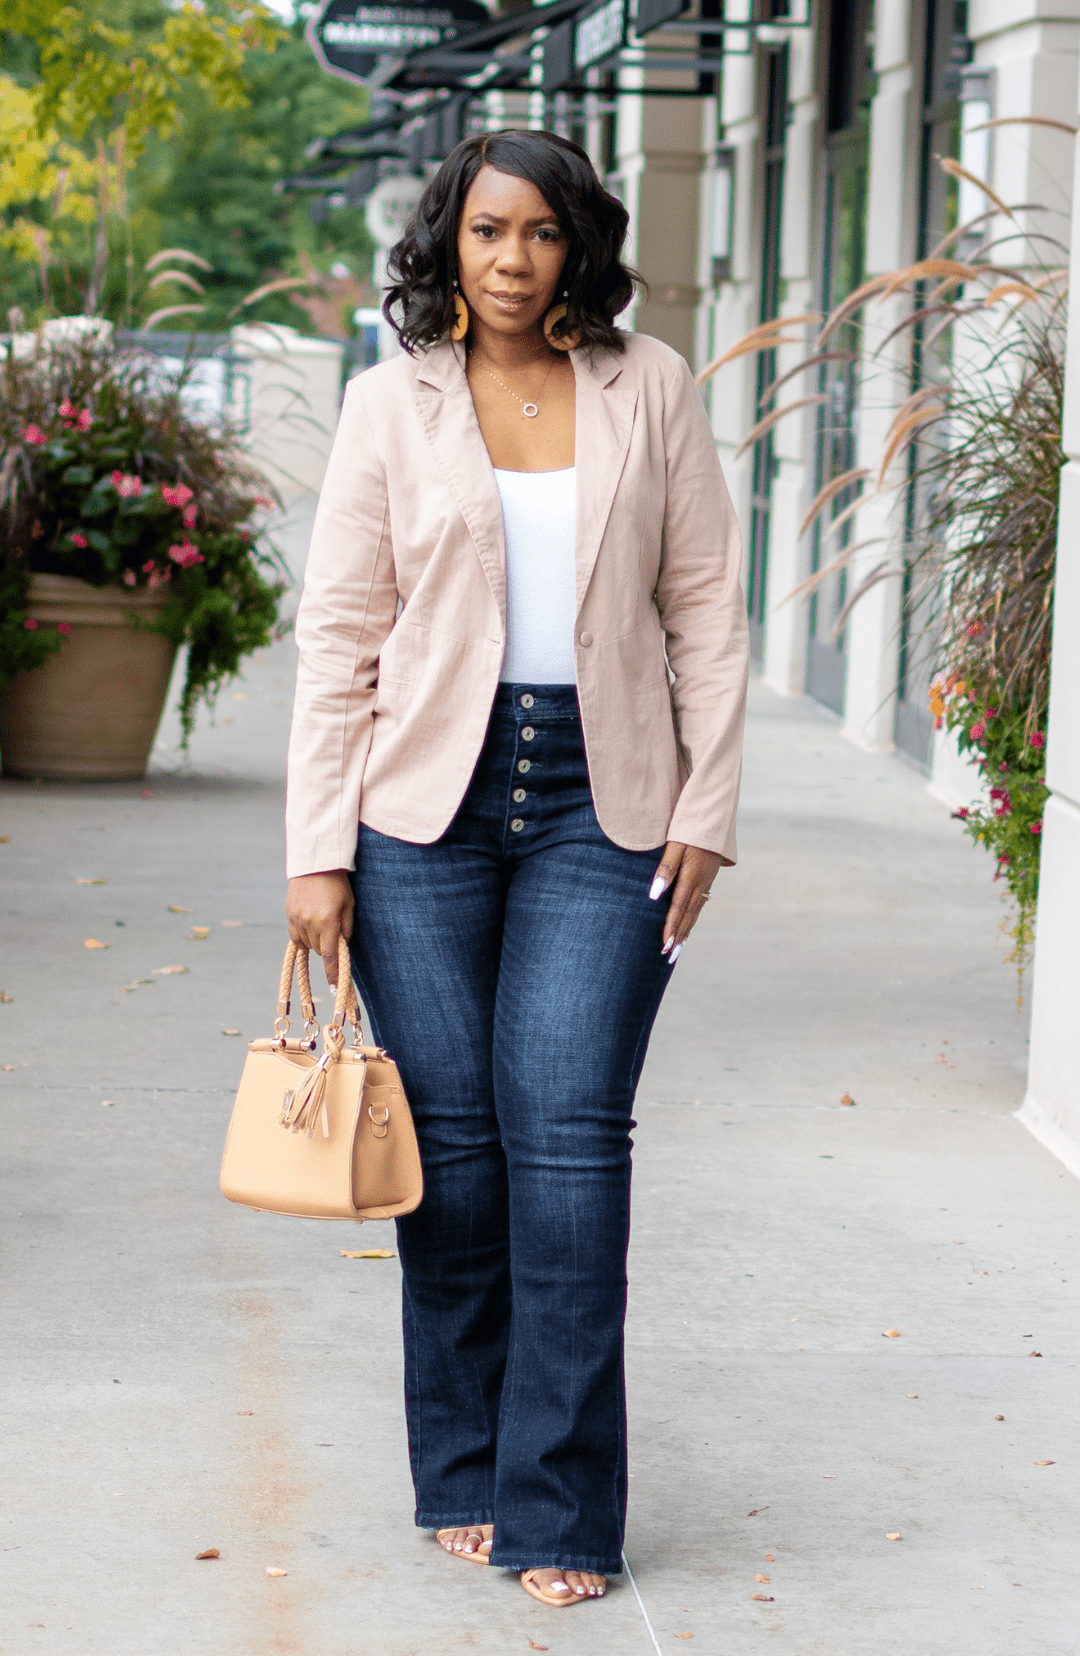 7 Outfits, 1 Pair of Flare Jeans  How To Style Flare Jeans For